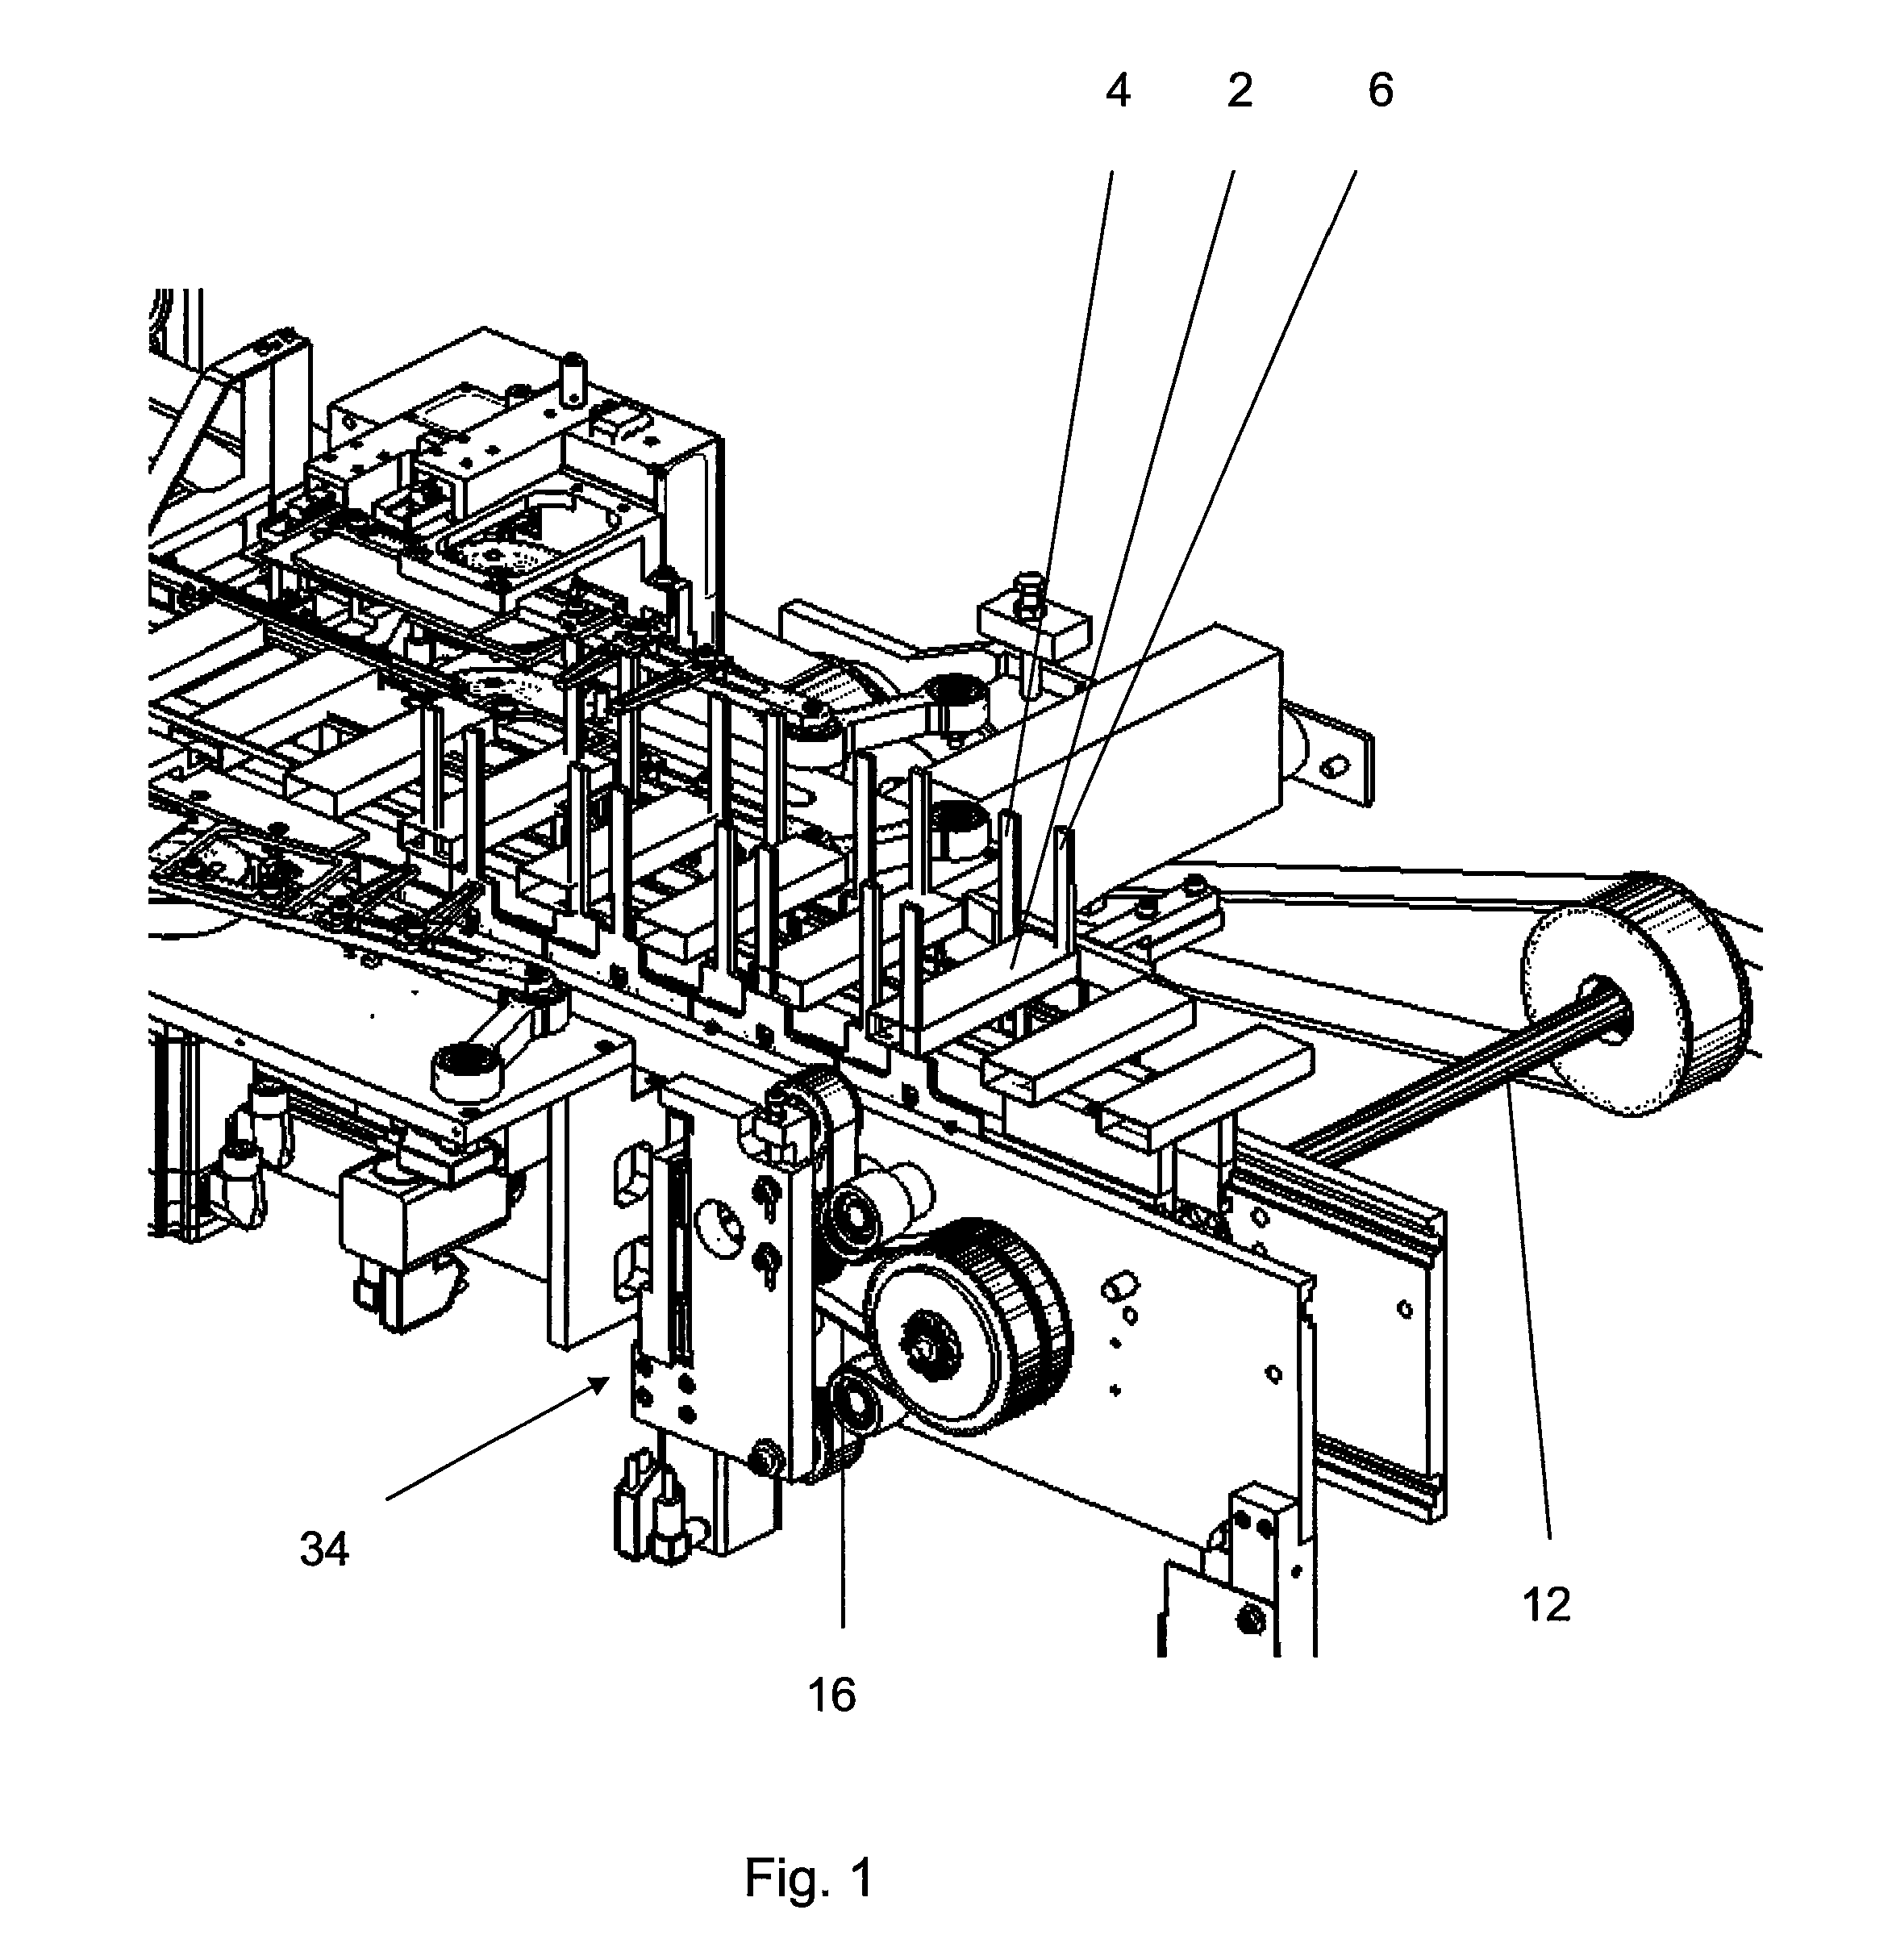 Device for conveying objects in packaging machines